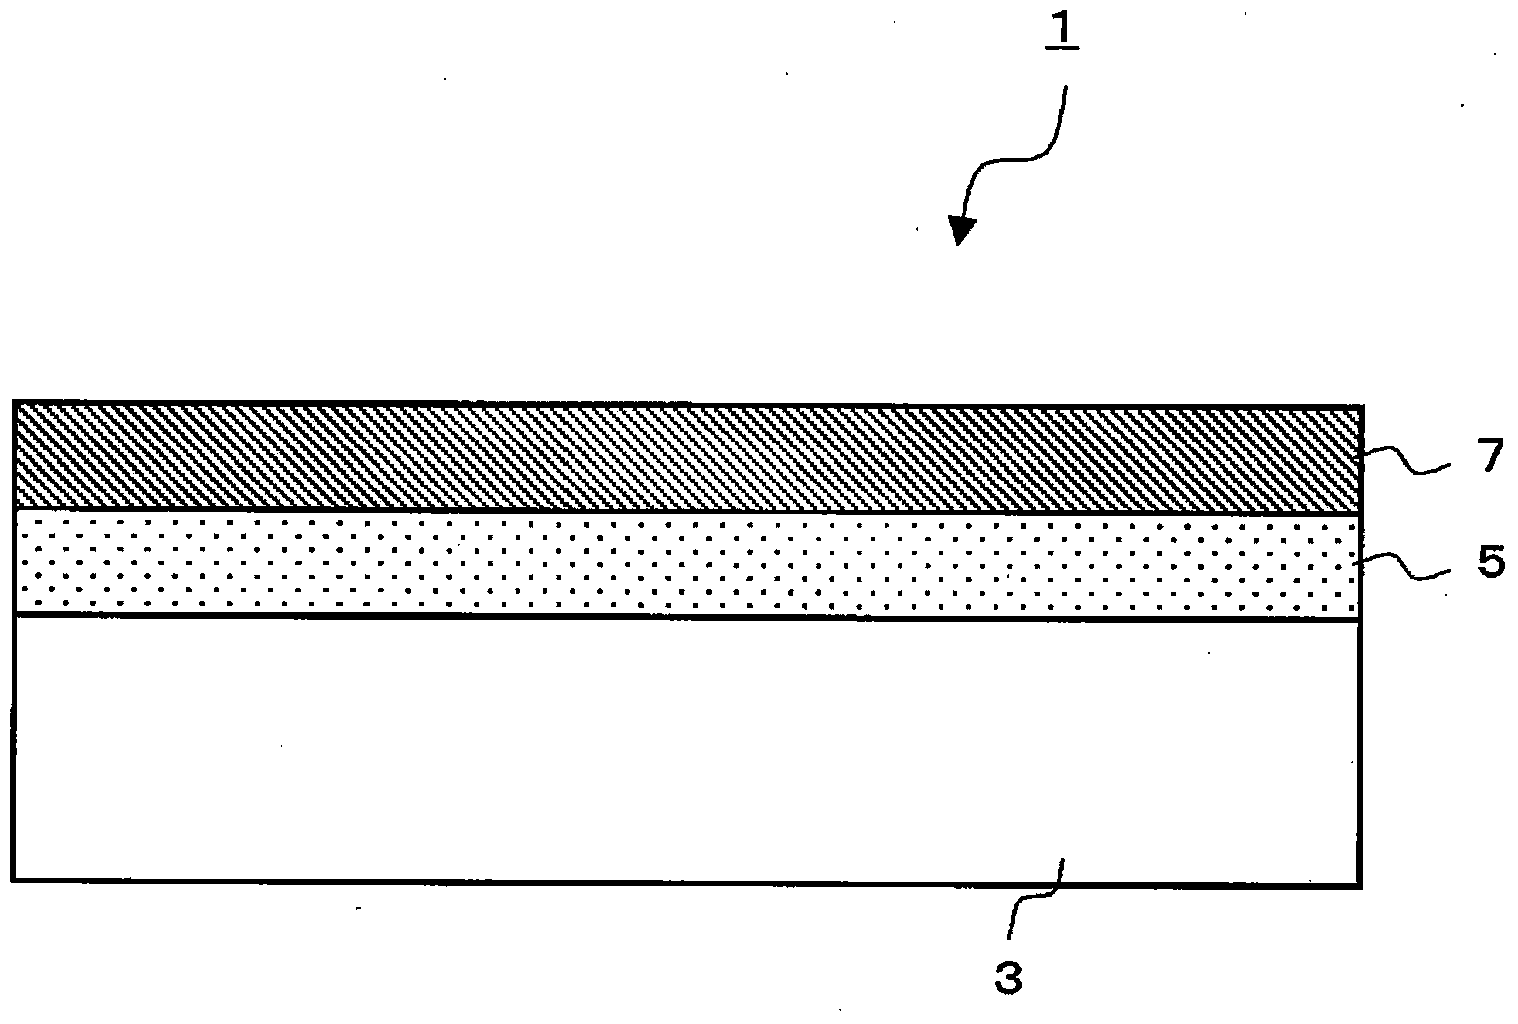 Dicing tape for processing semiconductor